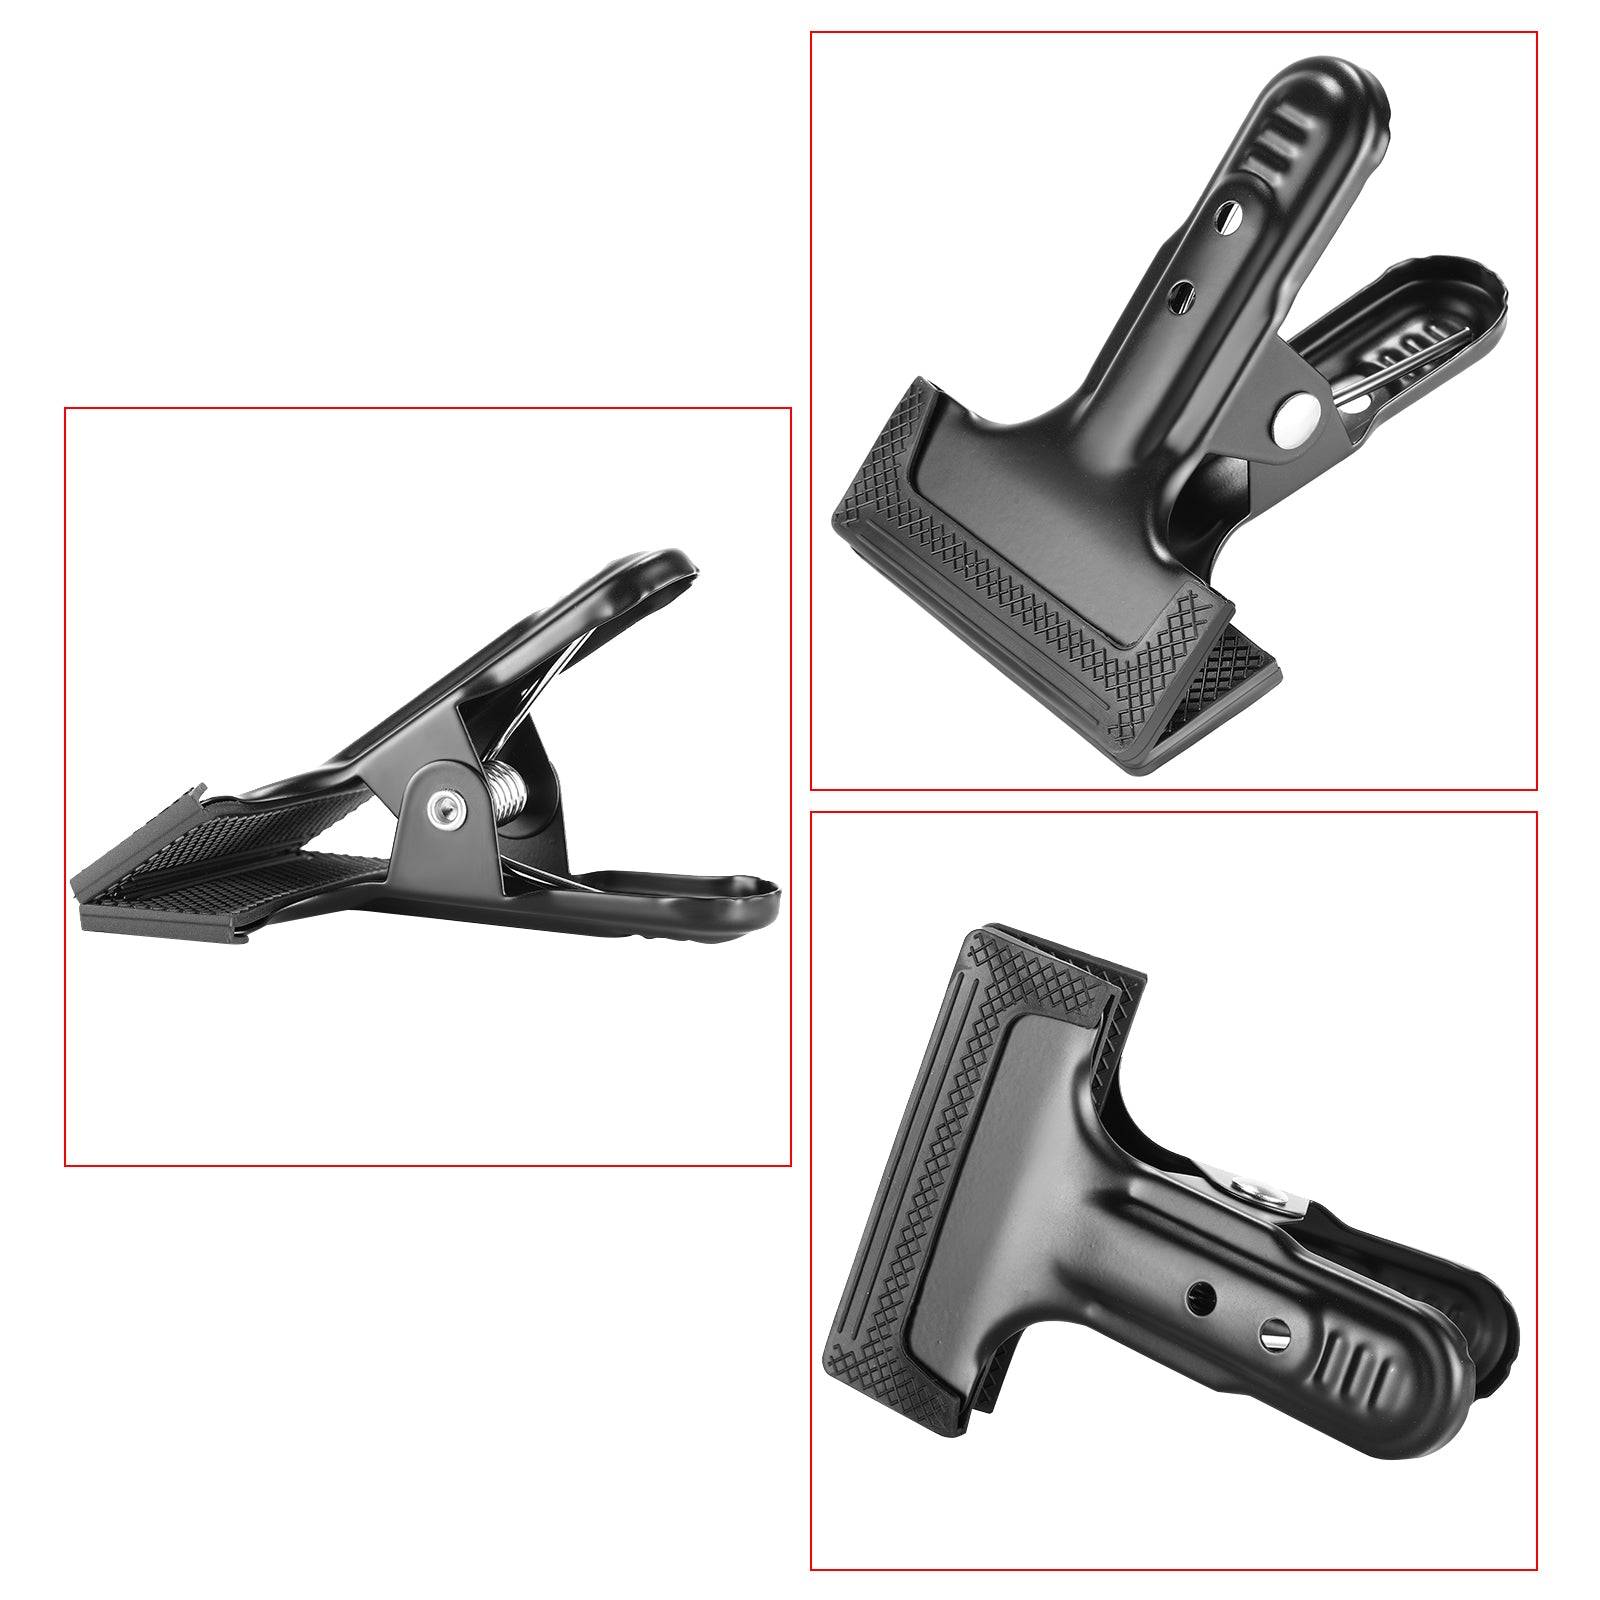 Strong Metal Clip Wide-mouth Spring Clamps for Photo Studio